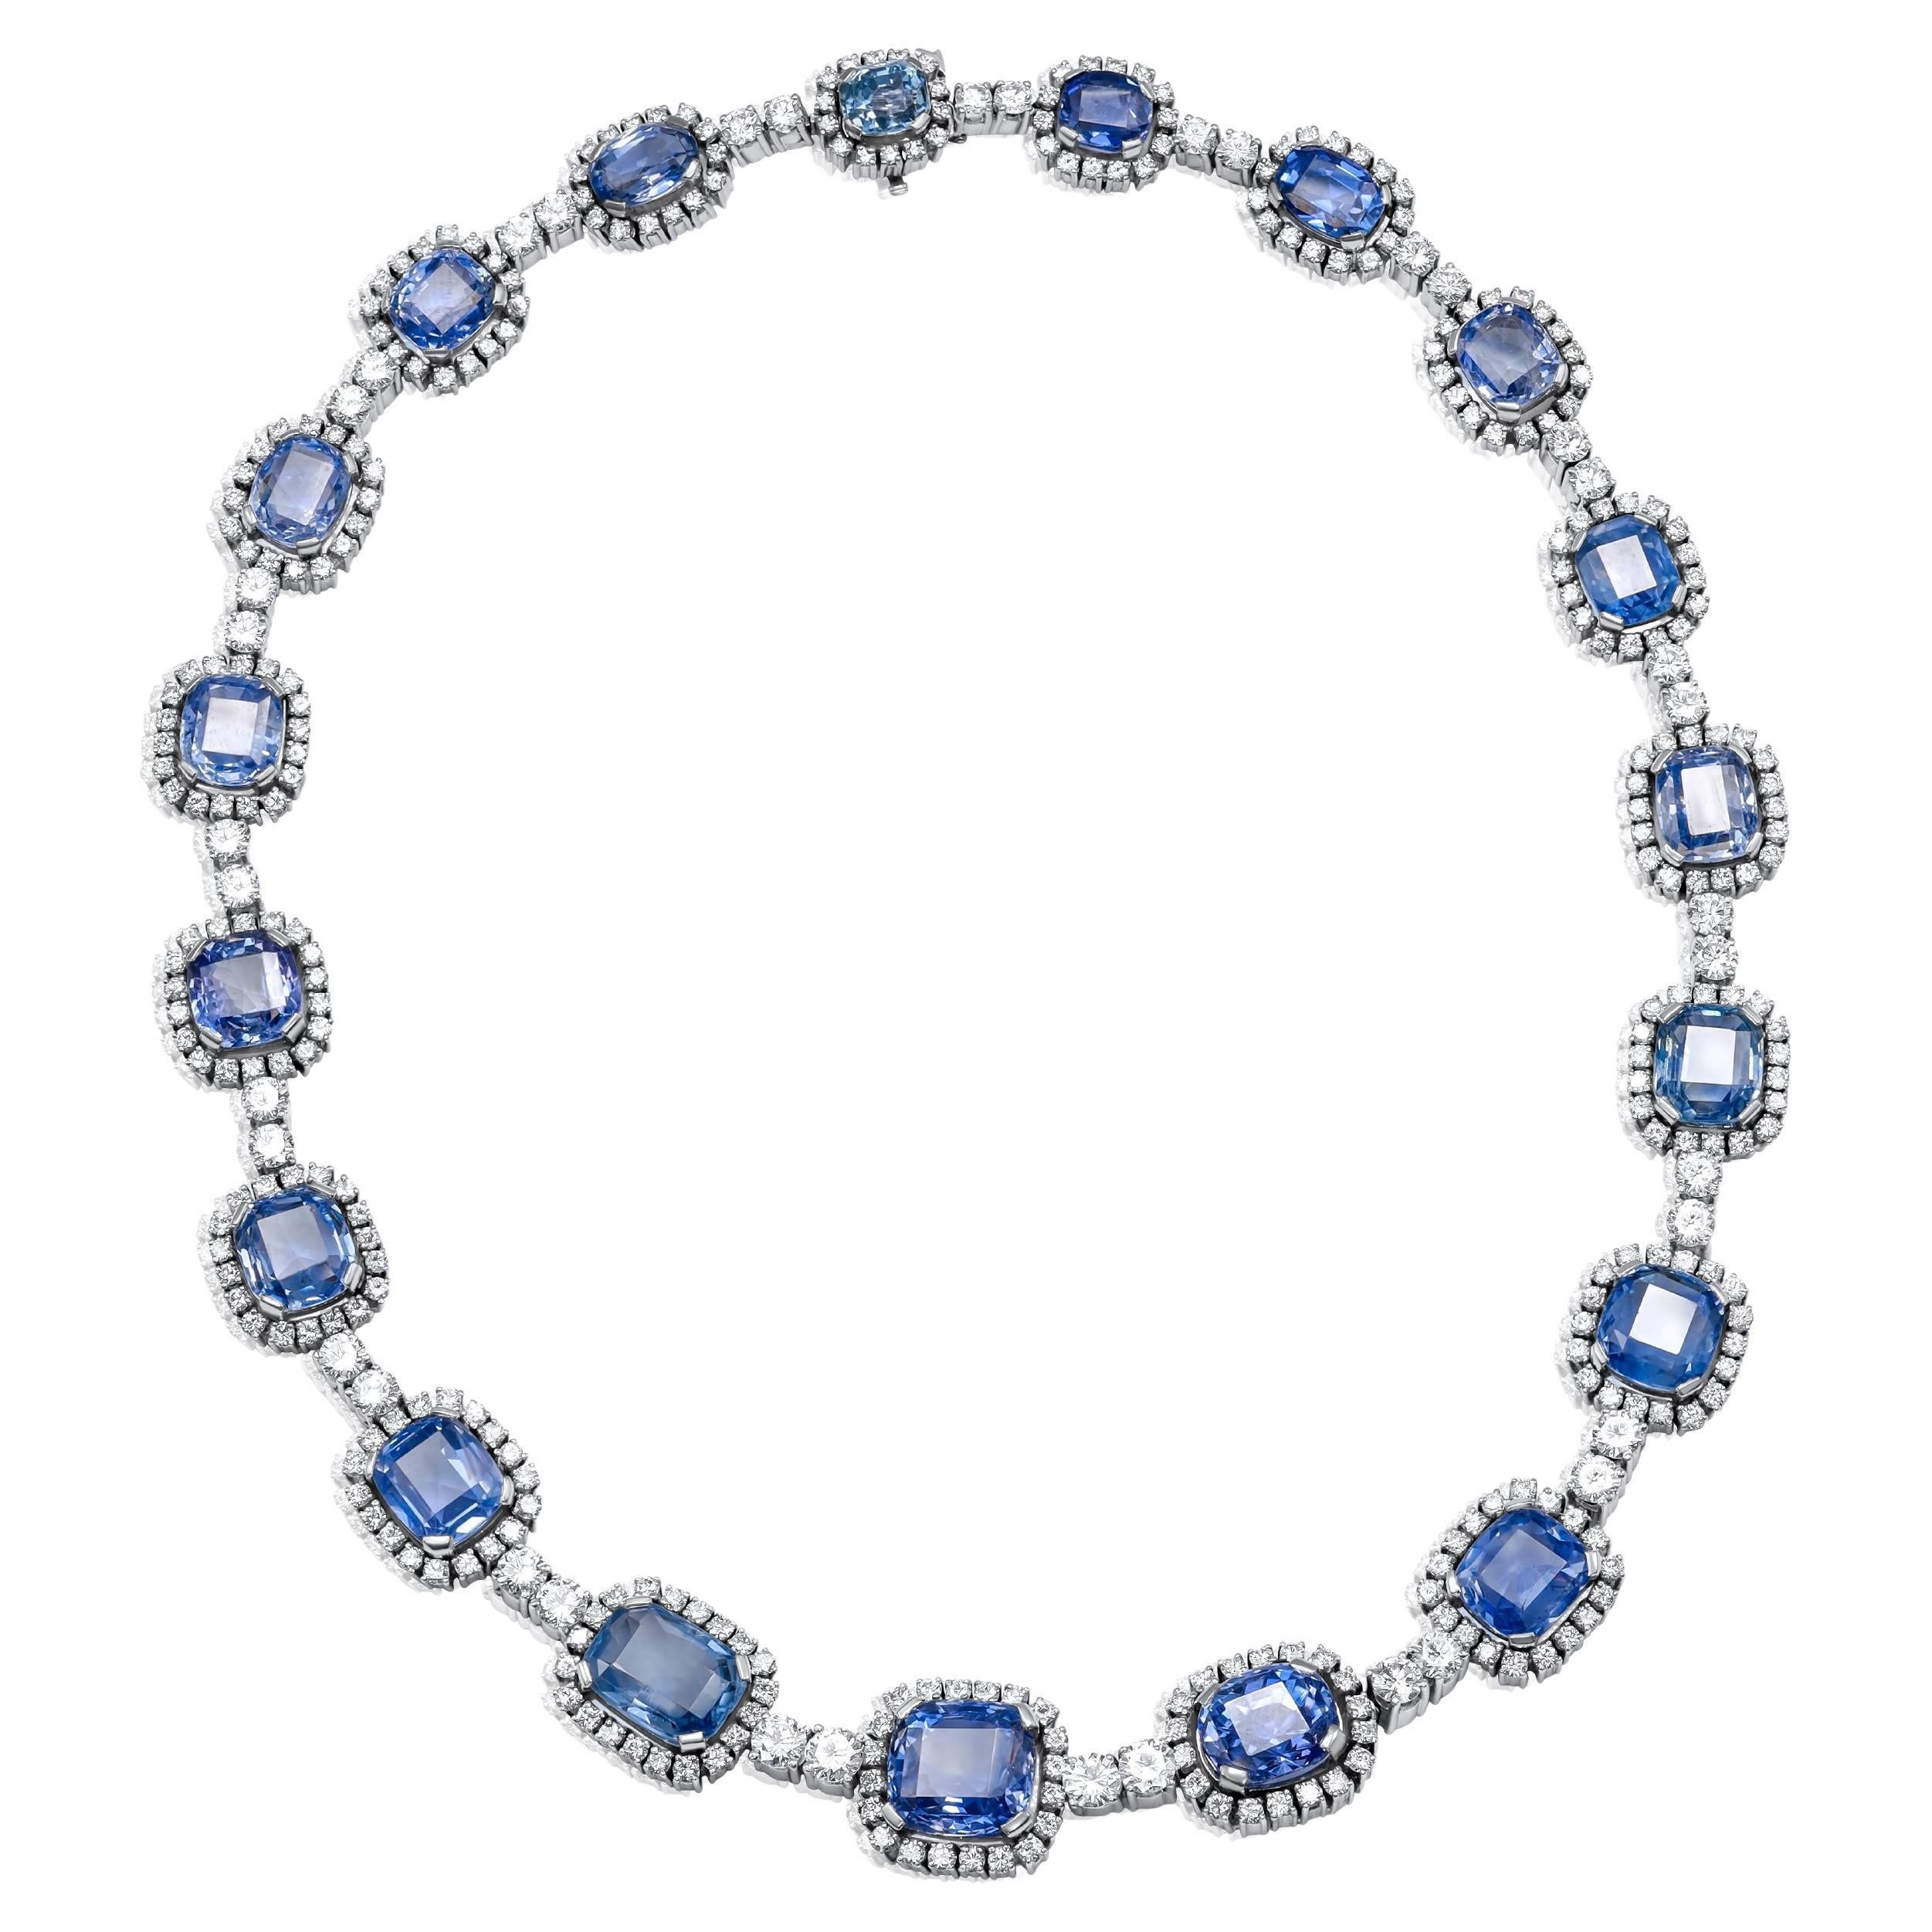 Diana M. 96.47 Carat Unheated Sapphire and Diamond Necklace in White Gold For Sale